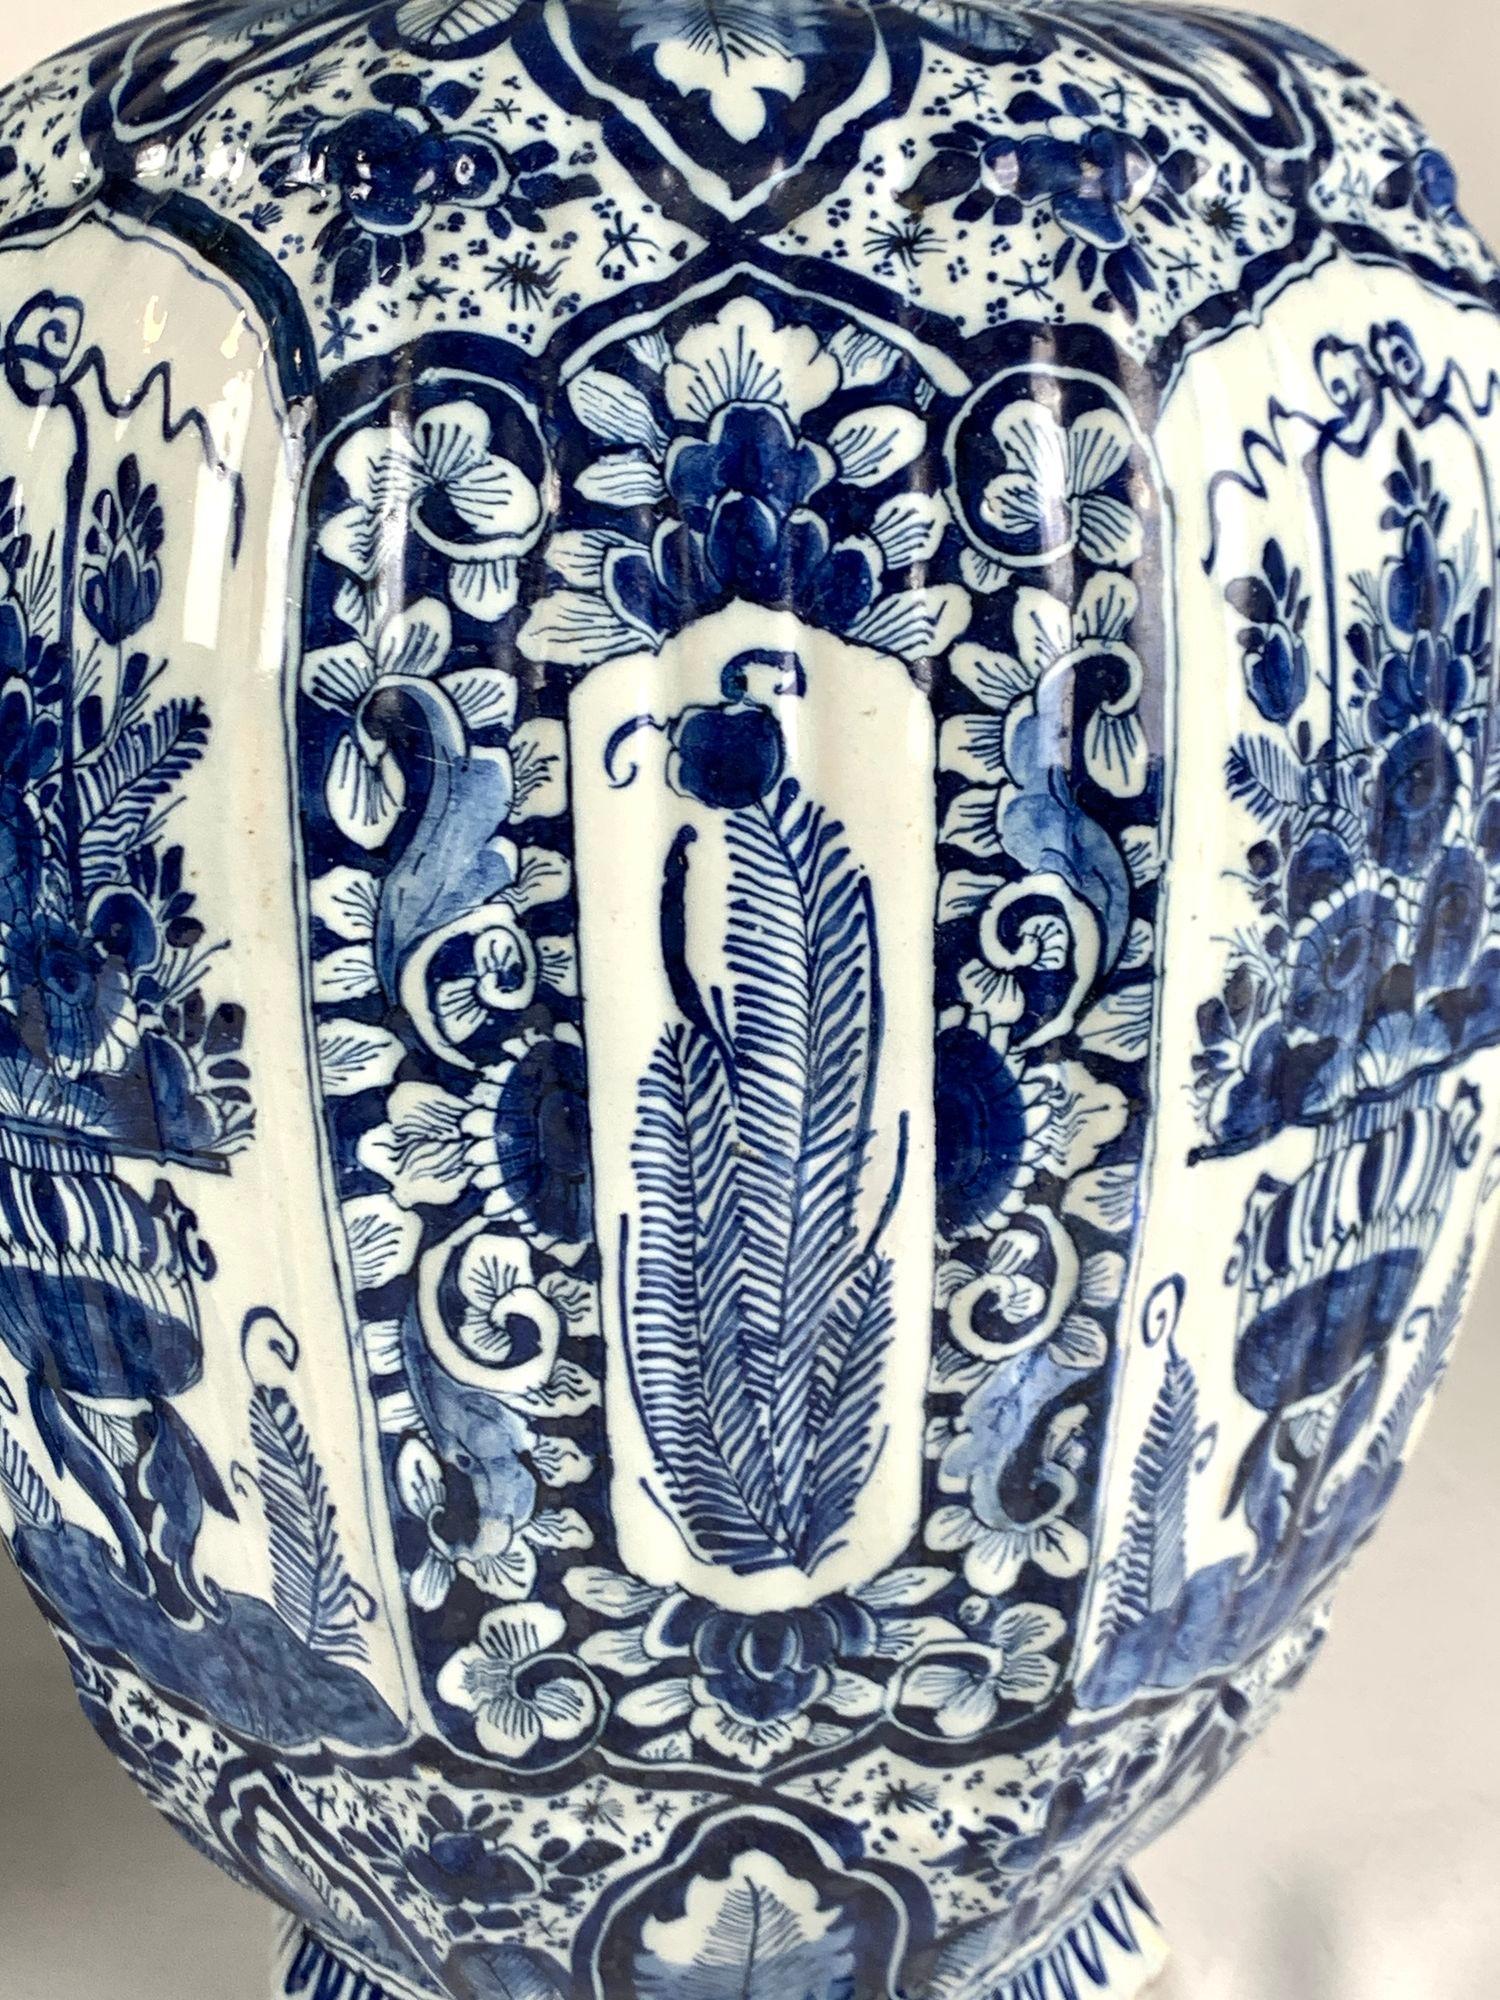 Large Blue and White Delft Jars Hand-Painted 18th Century Netherlands Circa 1780 For Sale 6